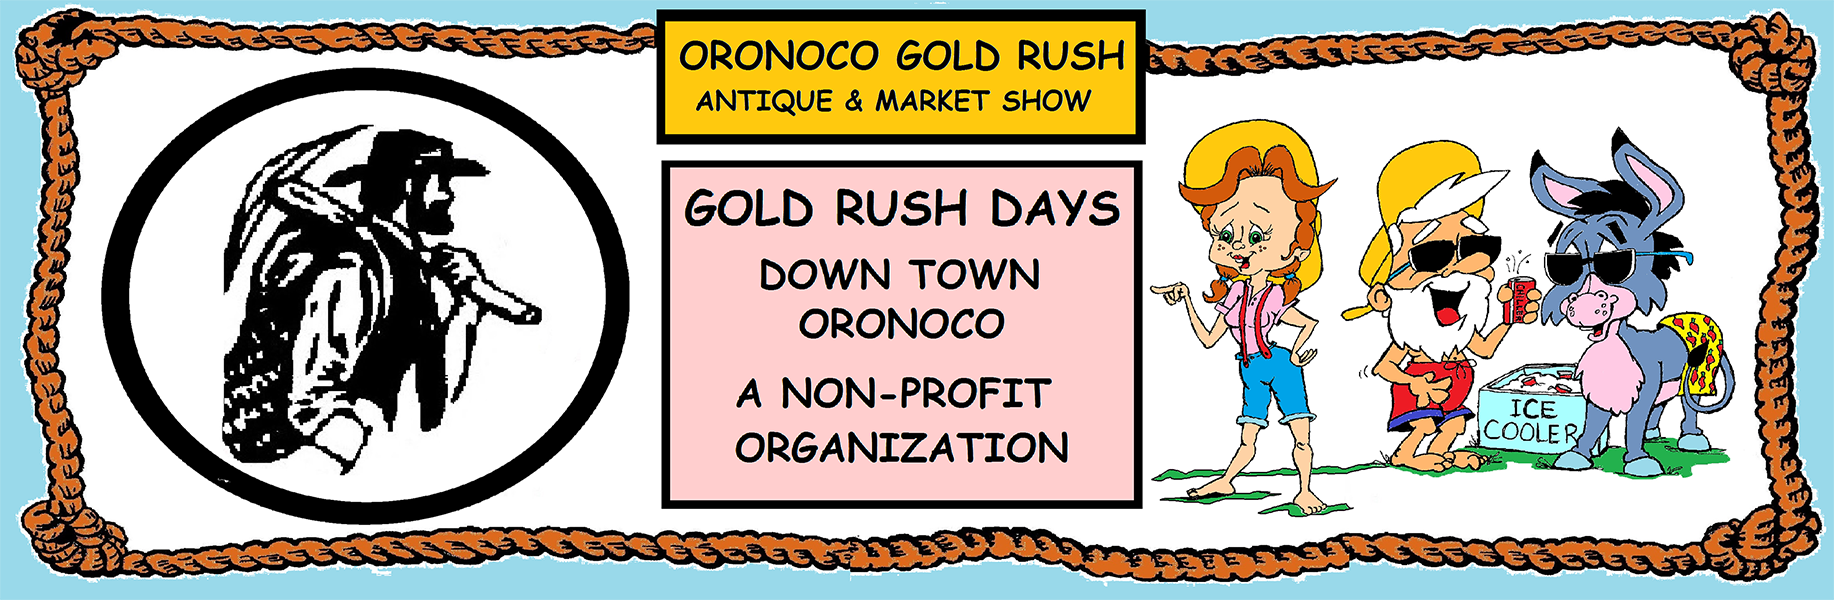 Bringing Families to the Downtown Oronoco Gold Rush Days Downtown